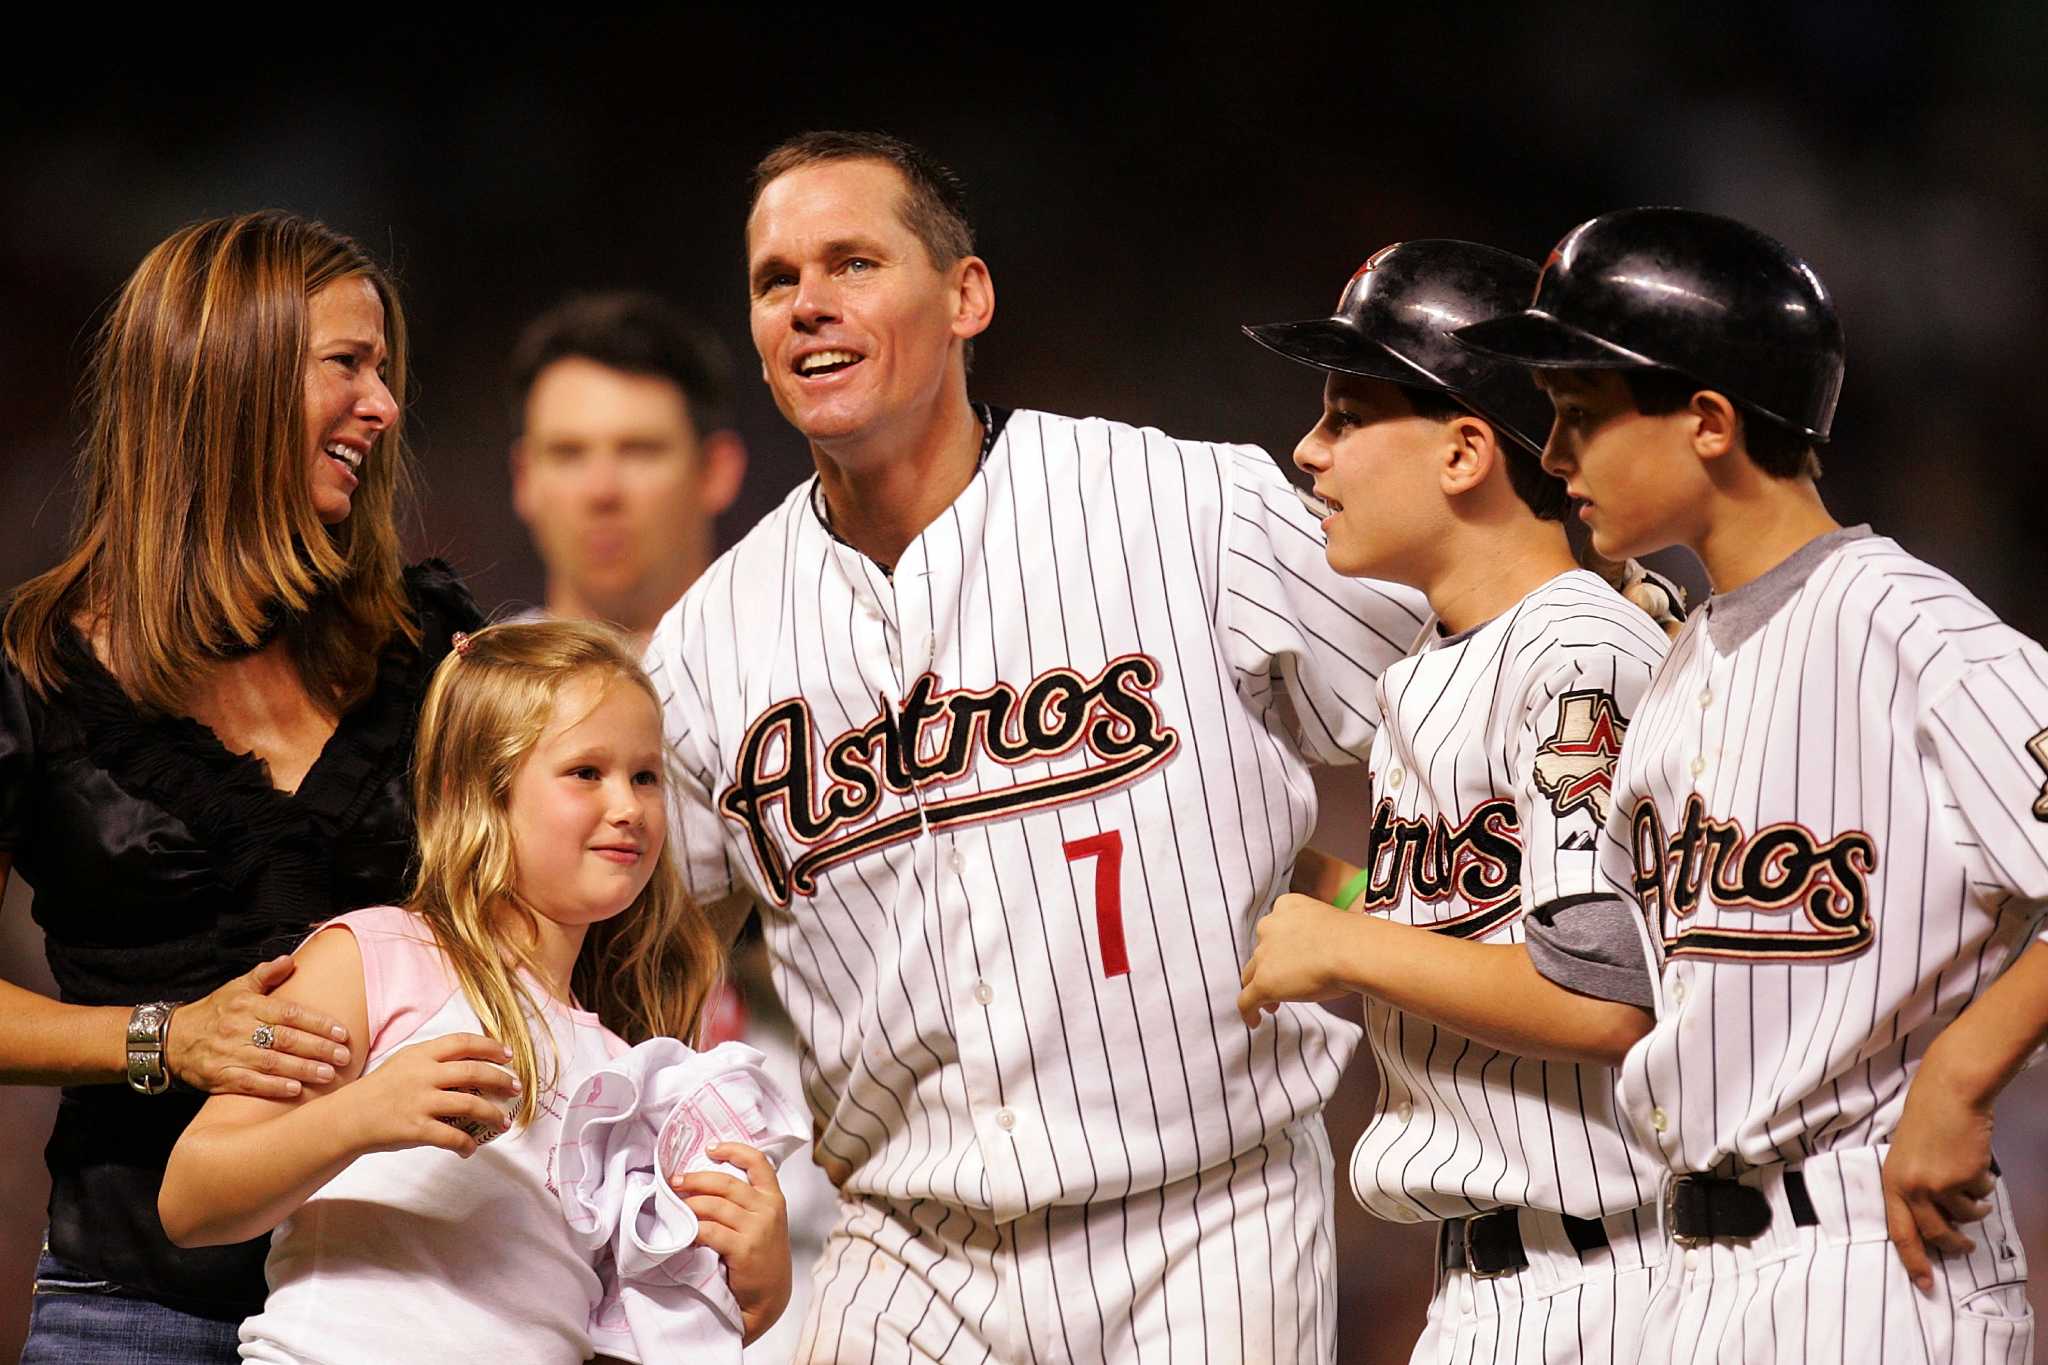 Biggio on being elected into Hall of Fame: Astros fans 'deserve